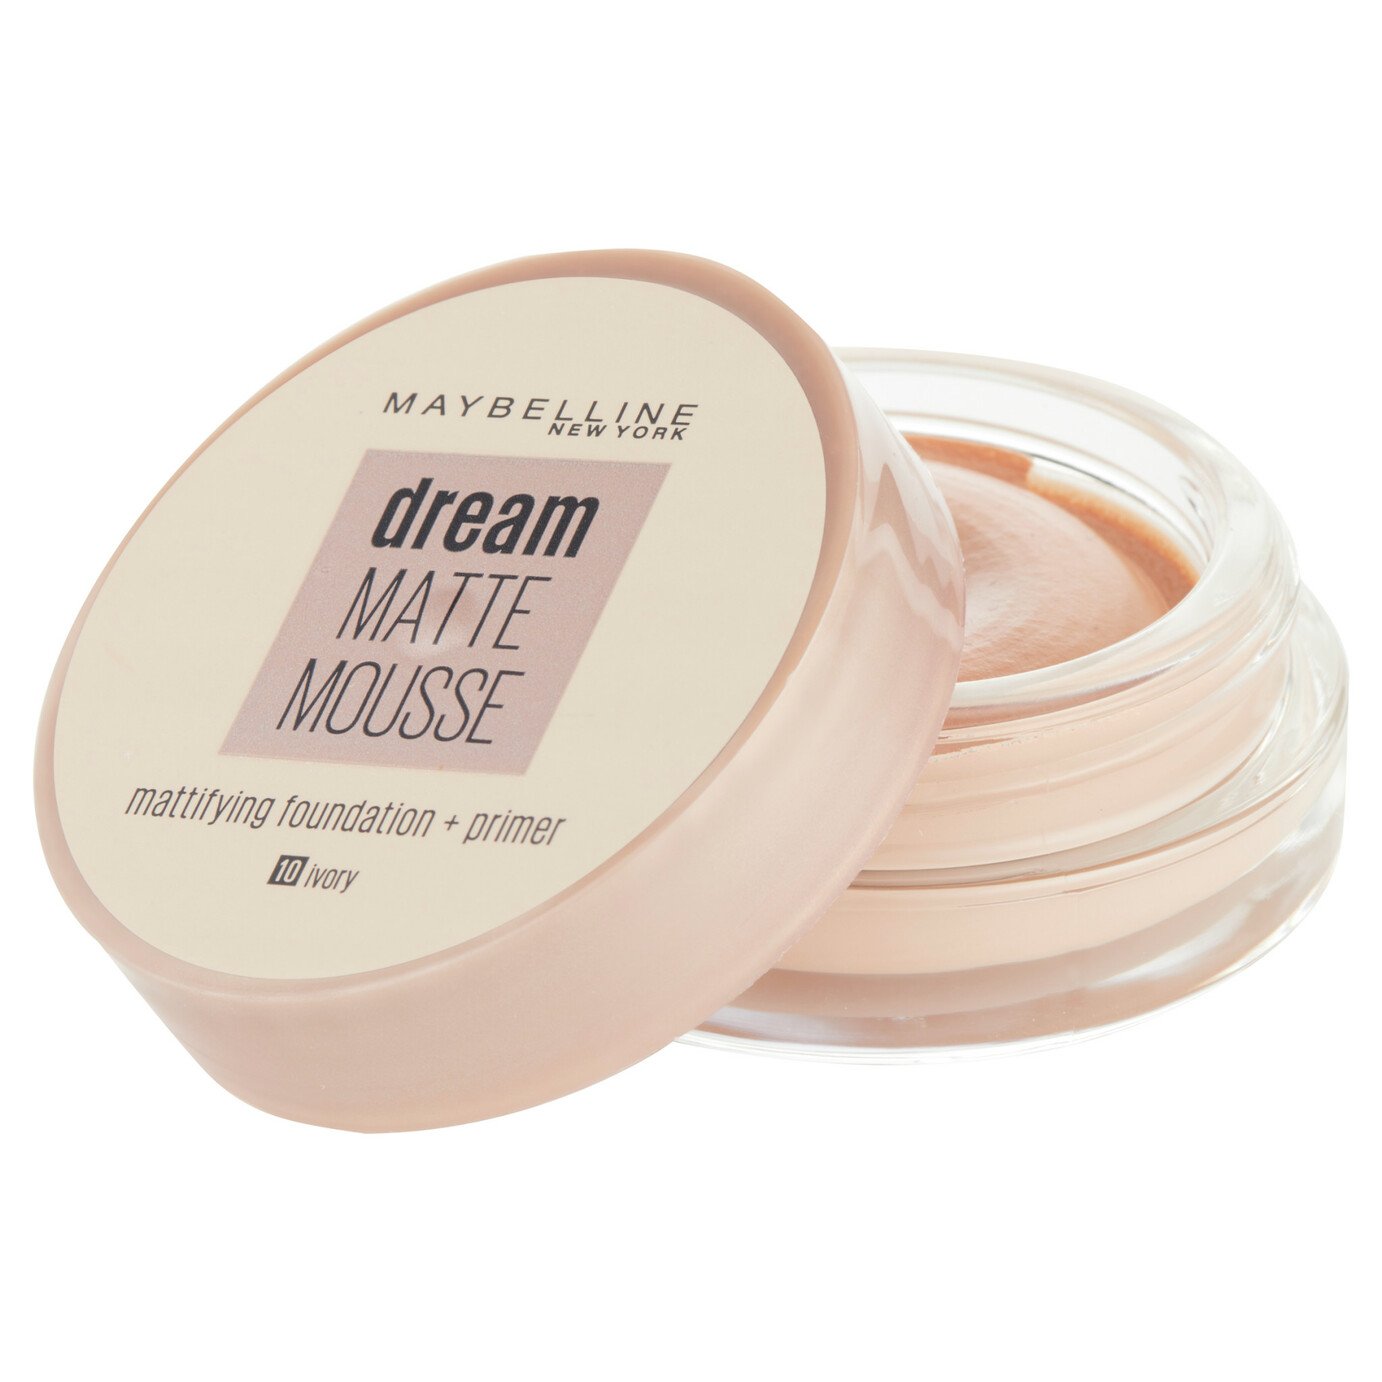 Maybelline Dream Matte Mousse - Ivory 10